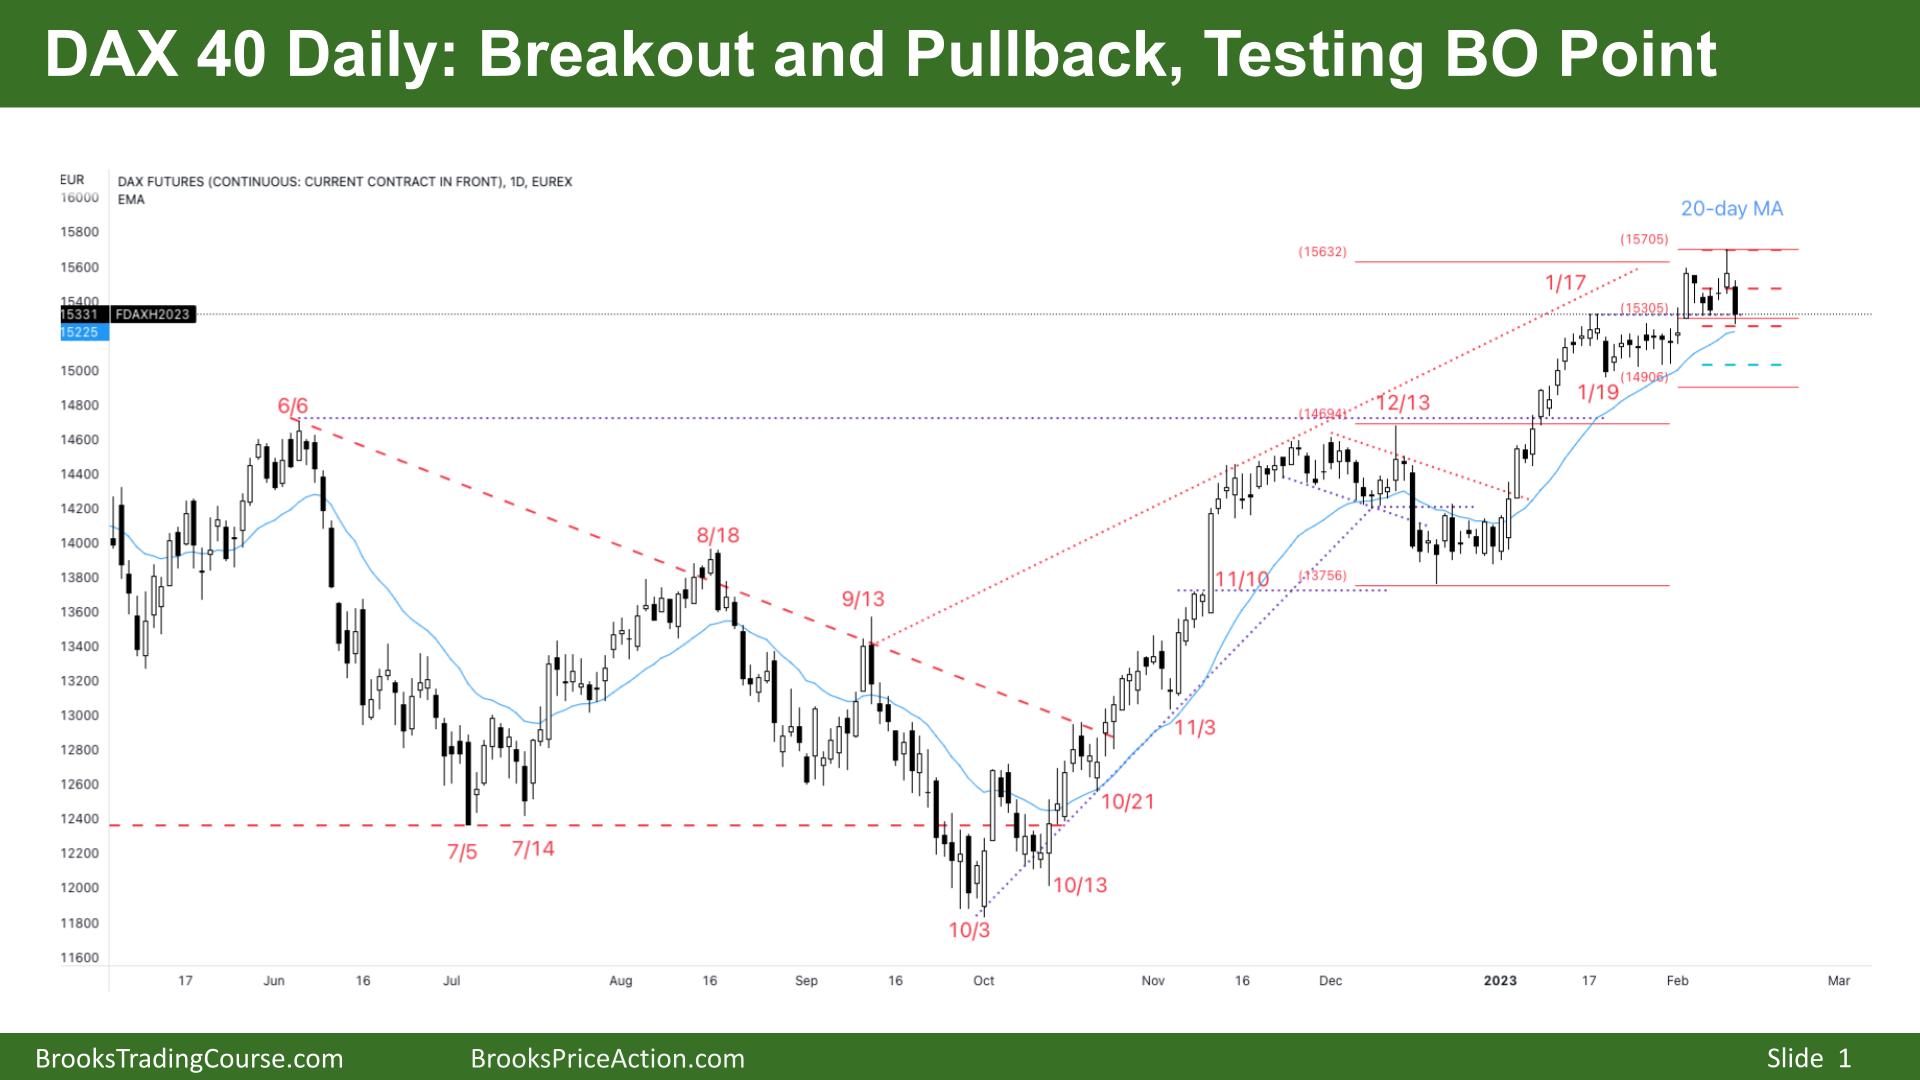 DAX 40 Breakout and Pullback Testing BO Point